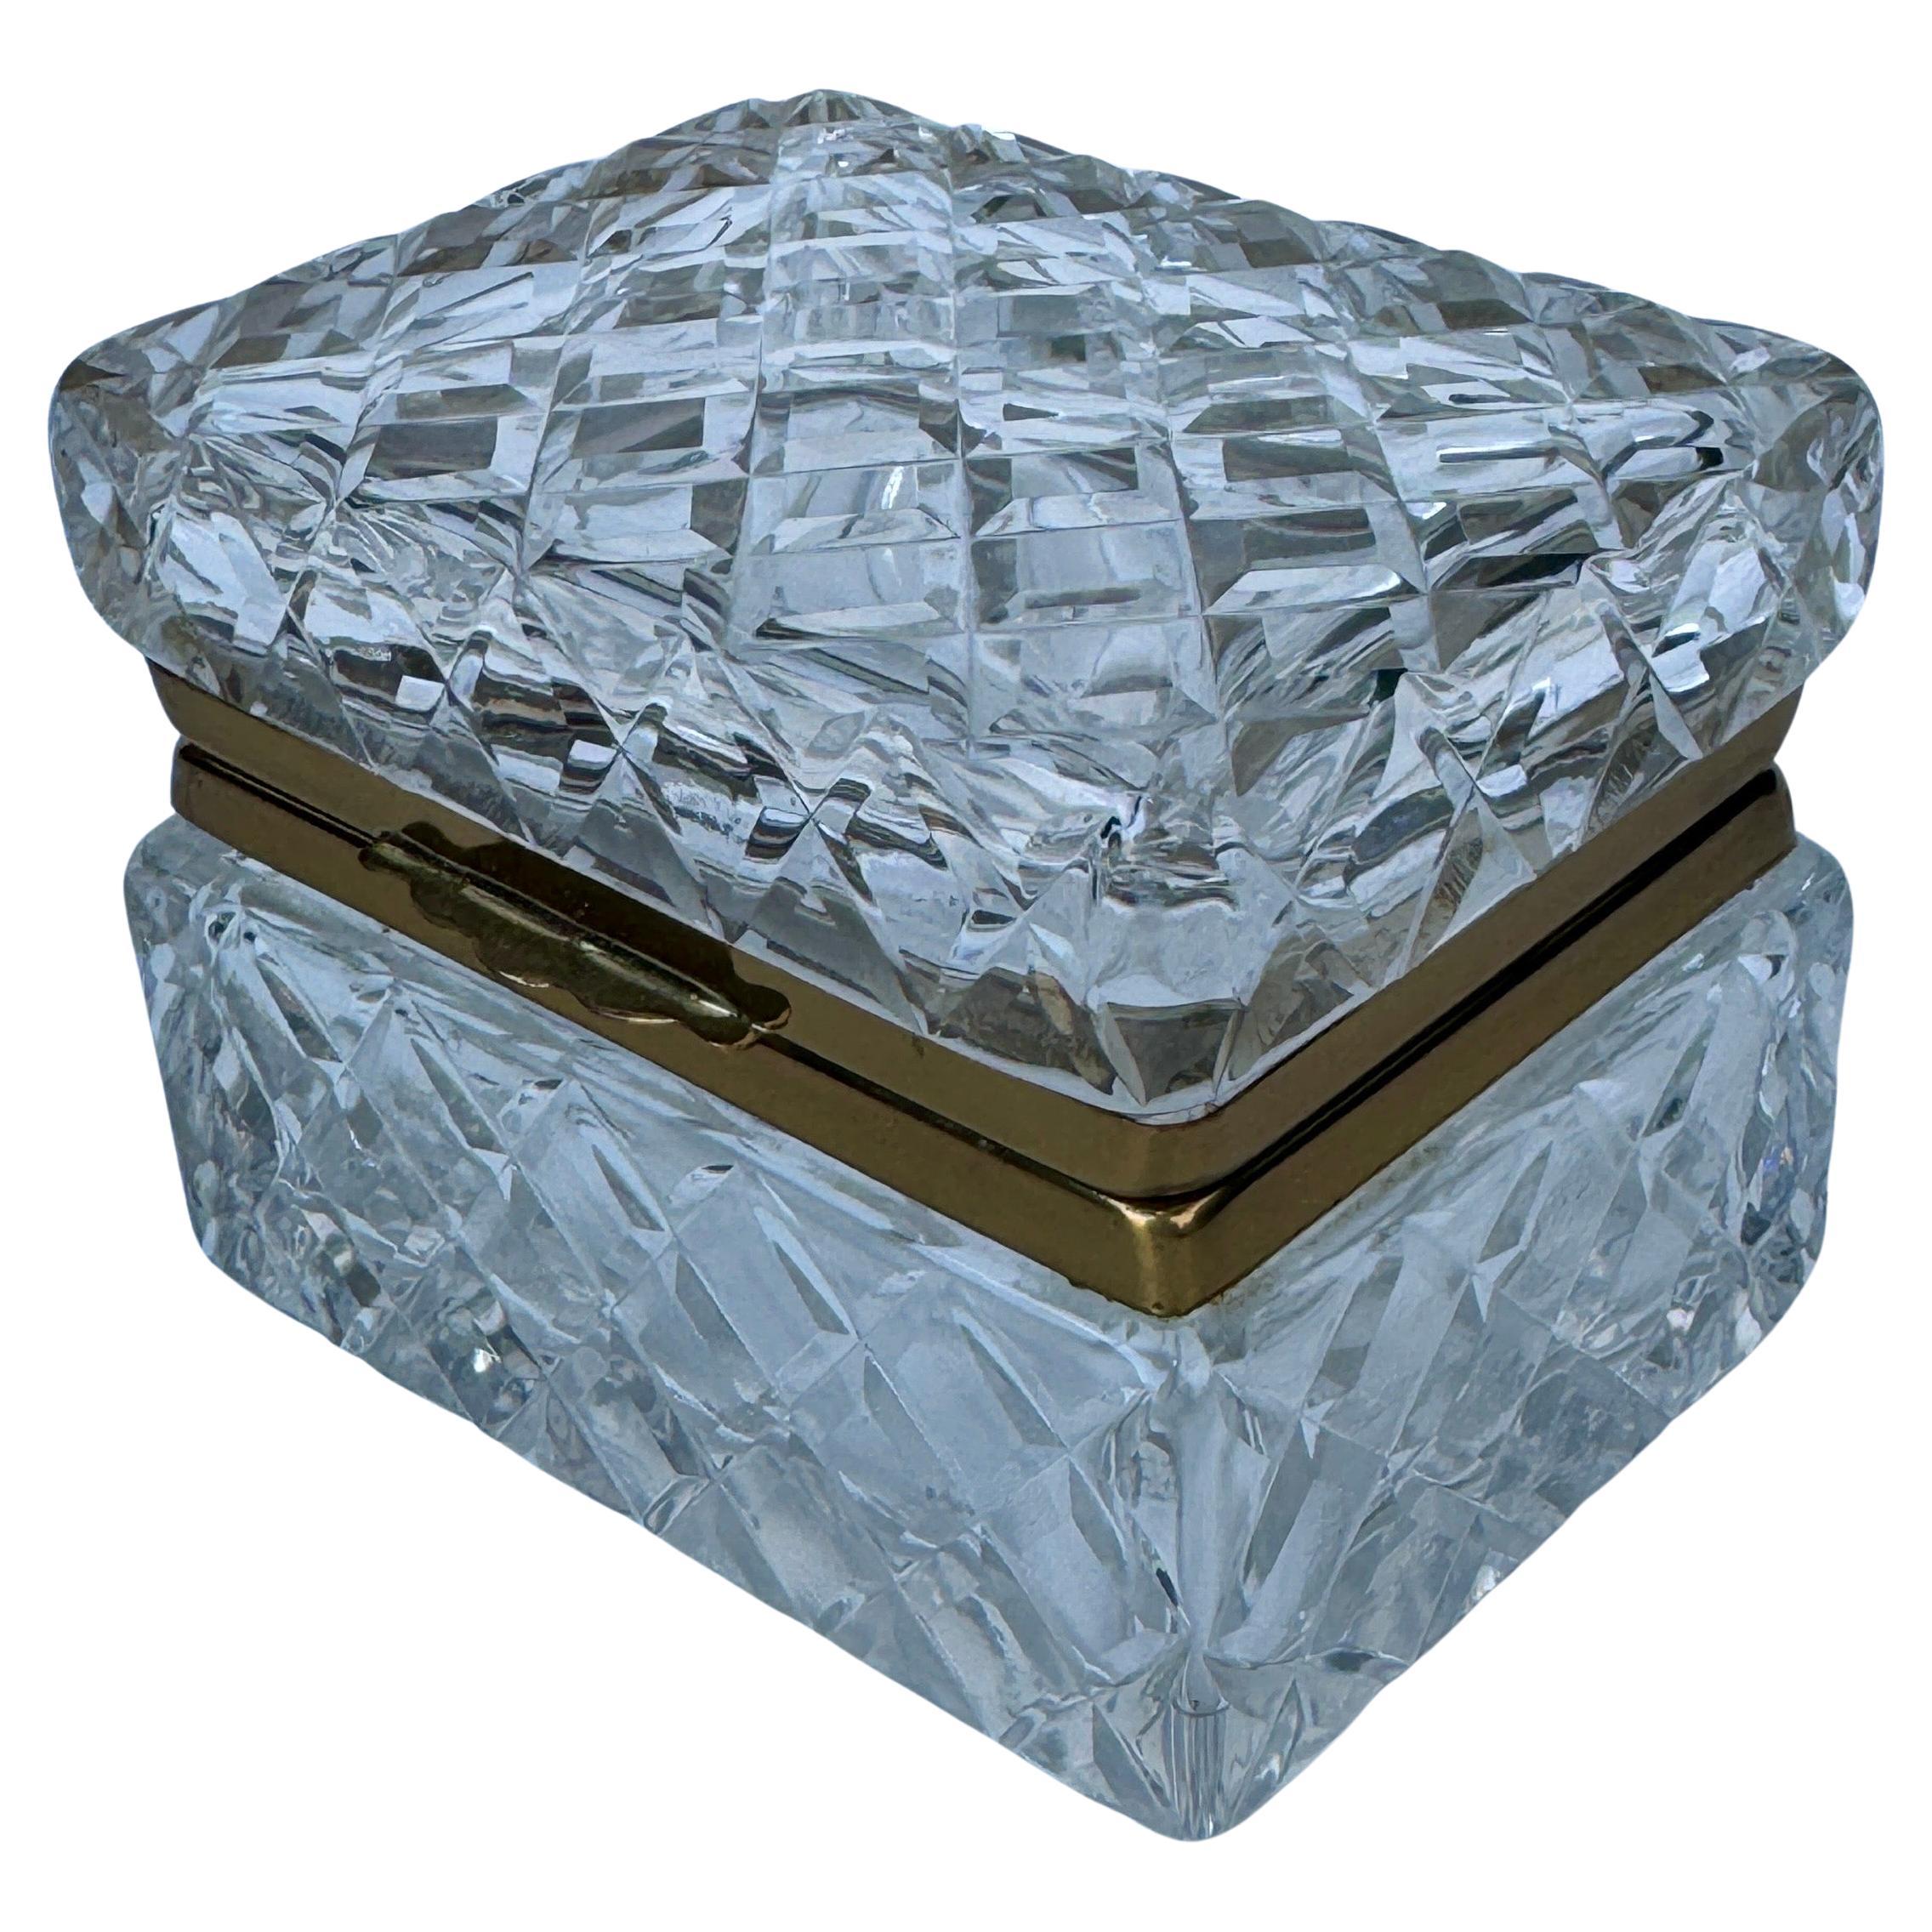 Small Rectangular Cut Glass Candis or Jewelry Box For Sale